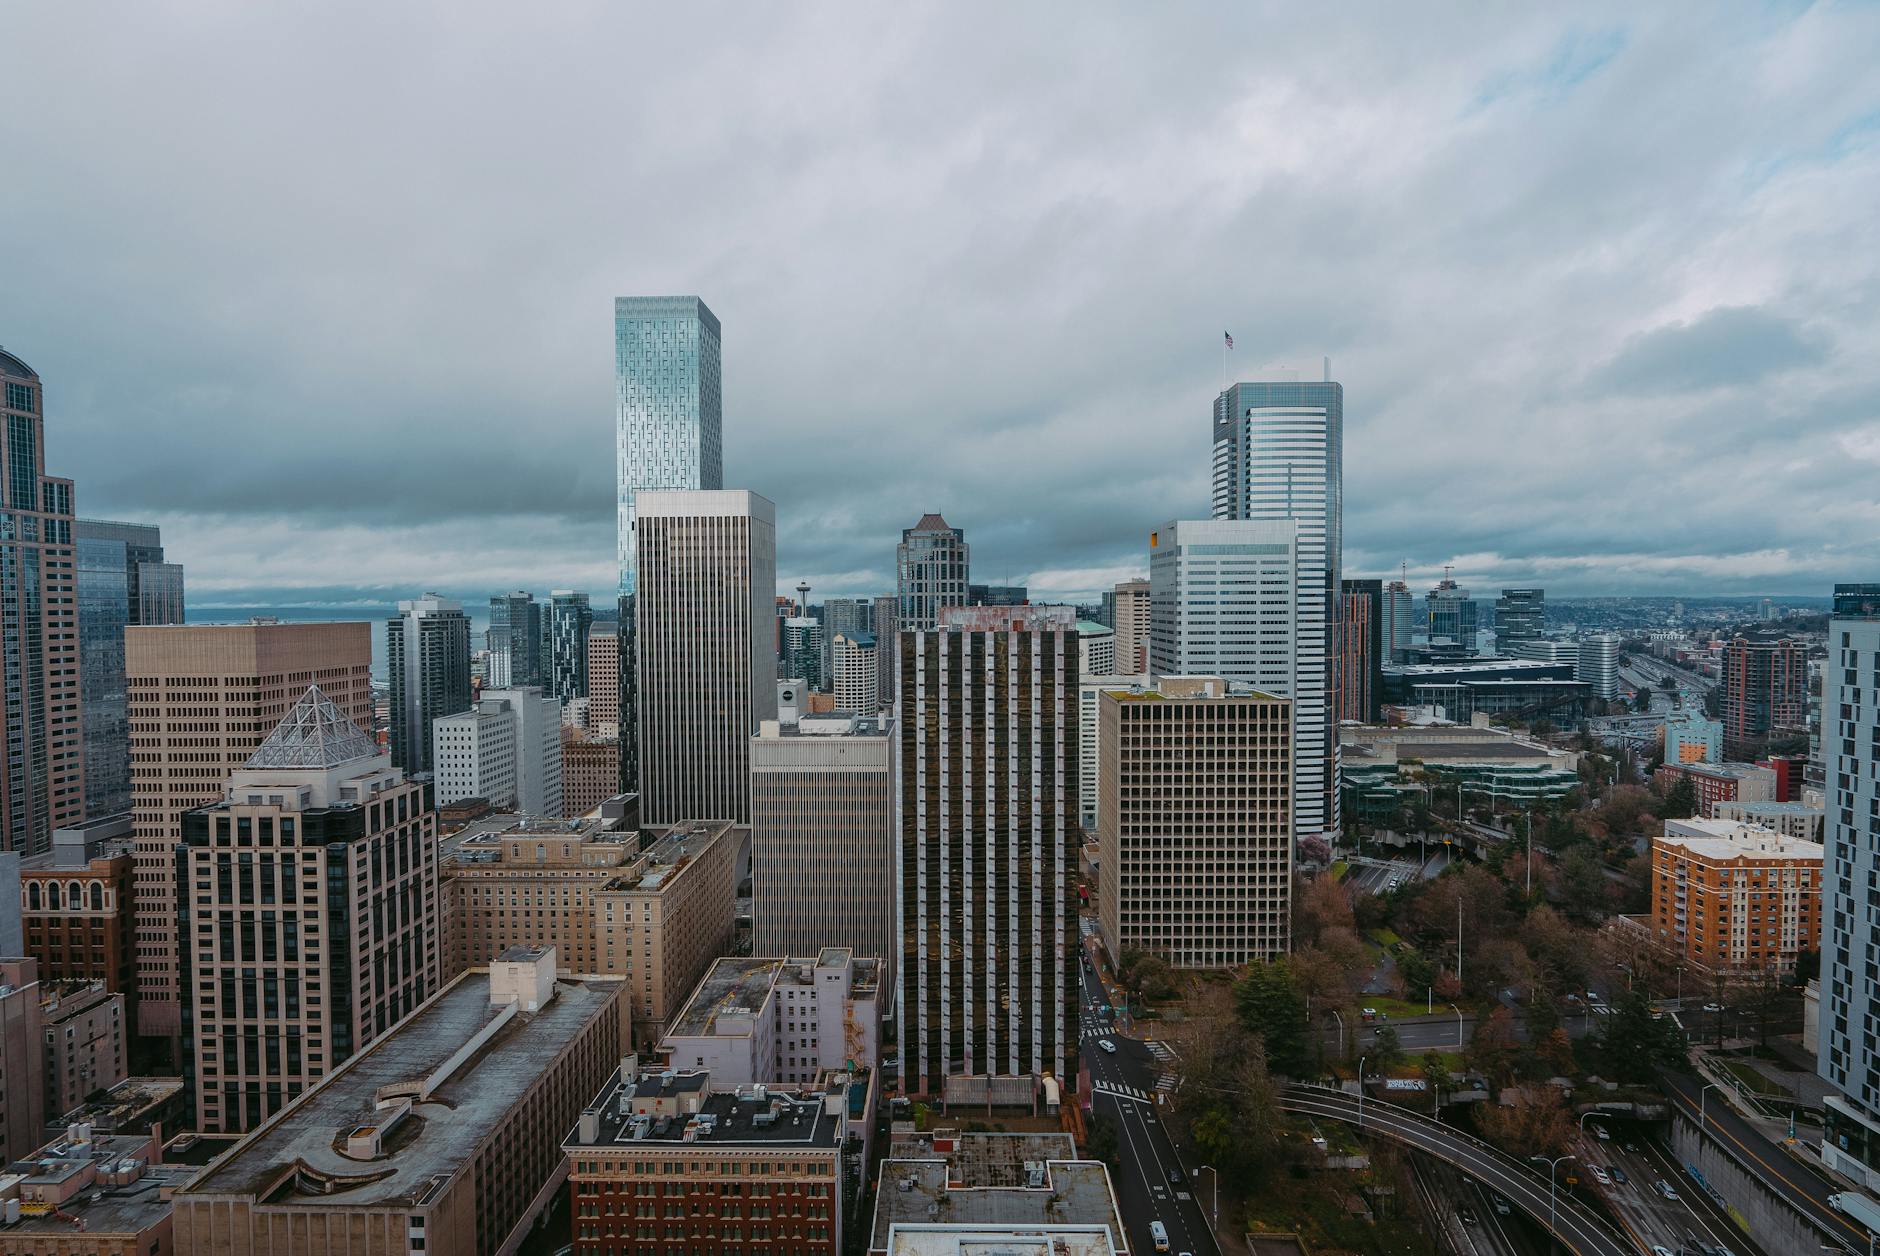 panoramic view of skyscrapers in a modern city